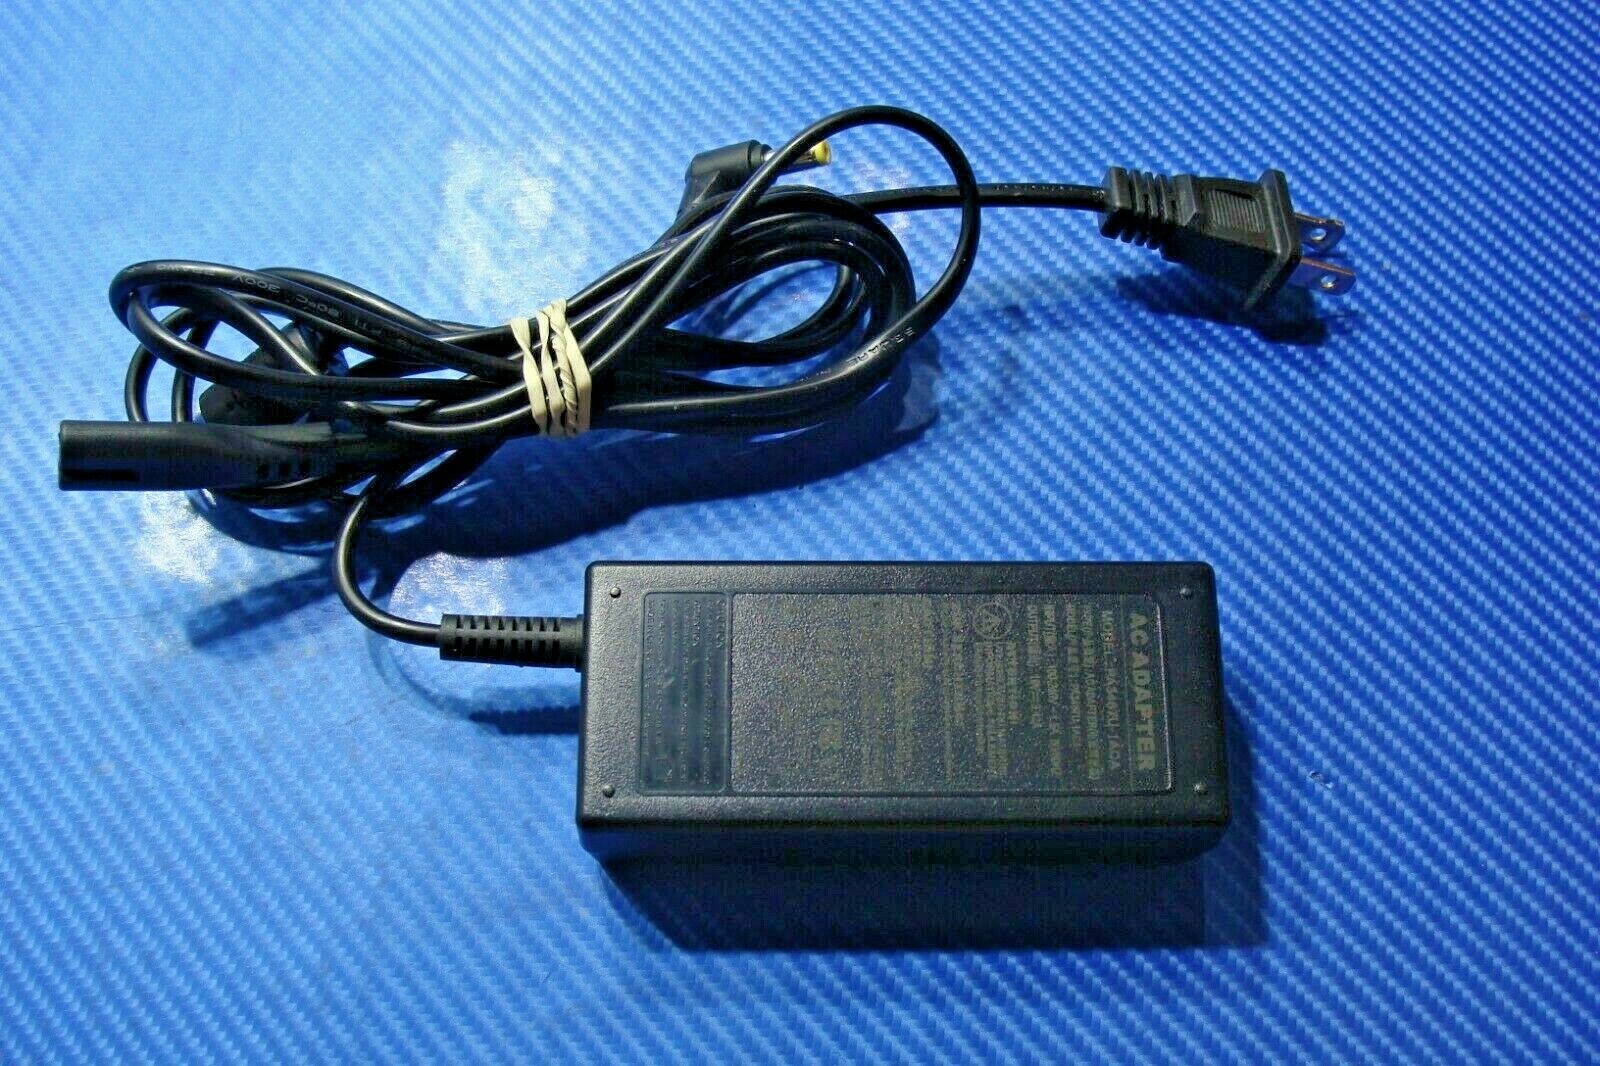 Toshiba OEM Genuine AC Charger Power Adapter PA3467U-1ACA 65W 19V 3.42A - Laptop Parts - Buy Authentic Computer Parts - Top Seller Ebay